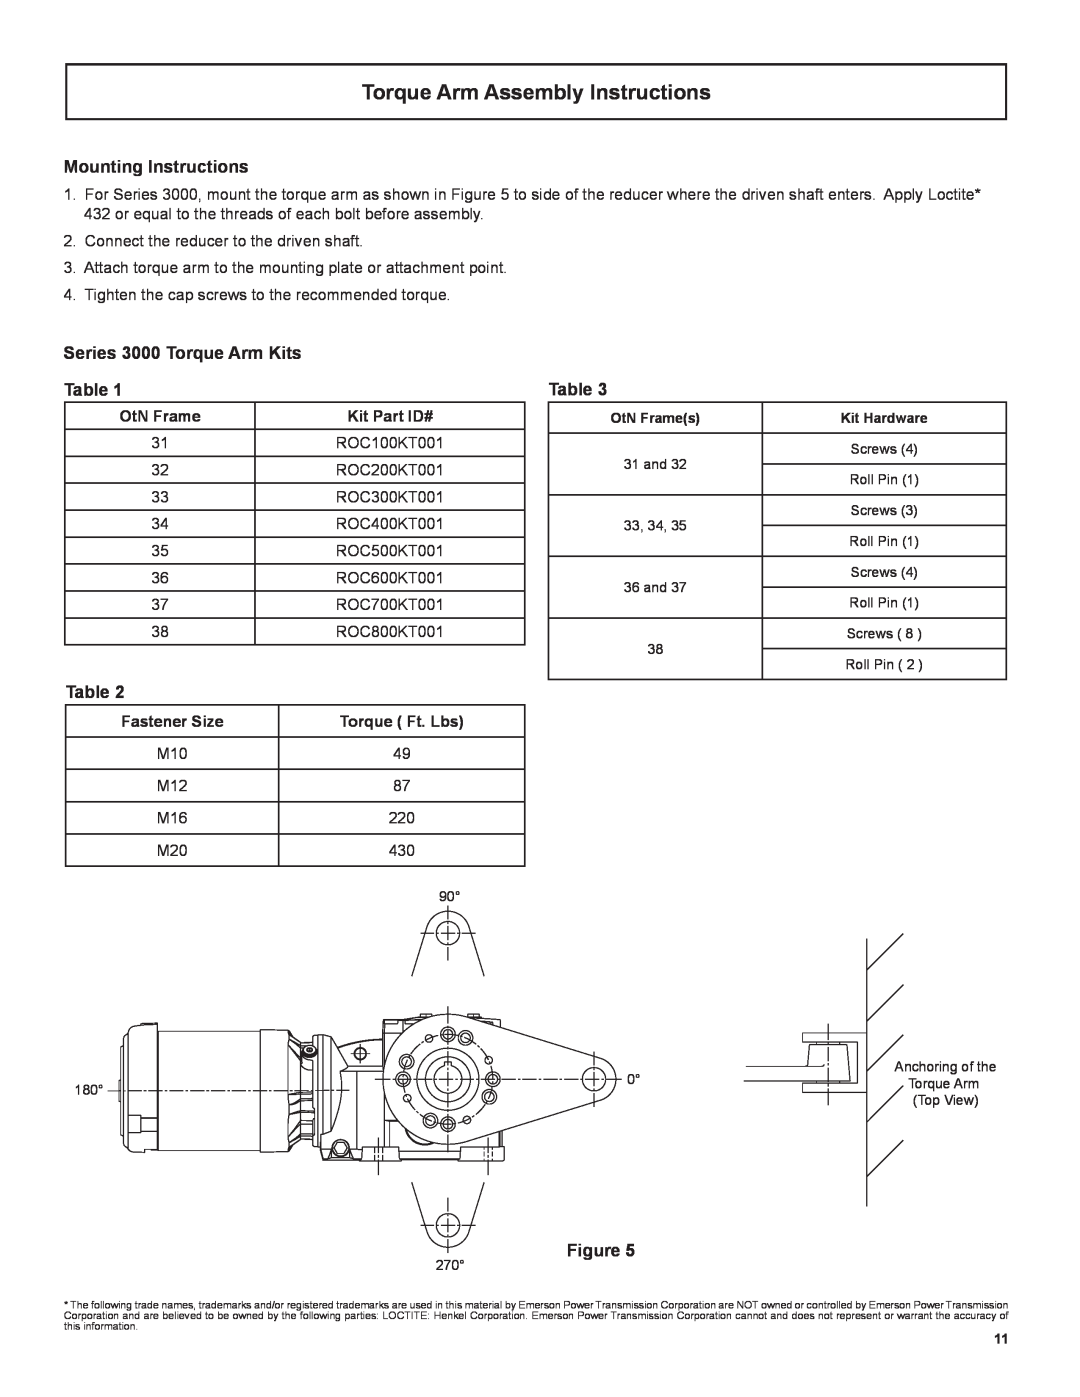 Emerson Torque Arm Assembly Instructions, Mounting Instructions, Series 3000 Torque Arm Kits Table 